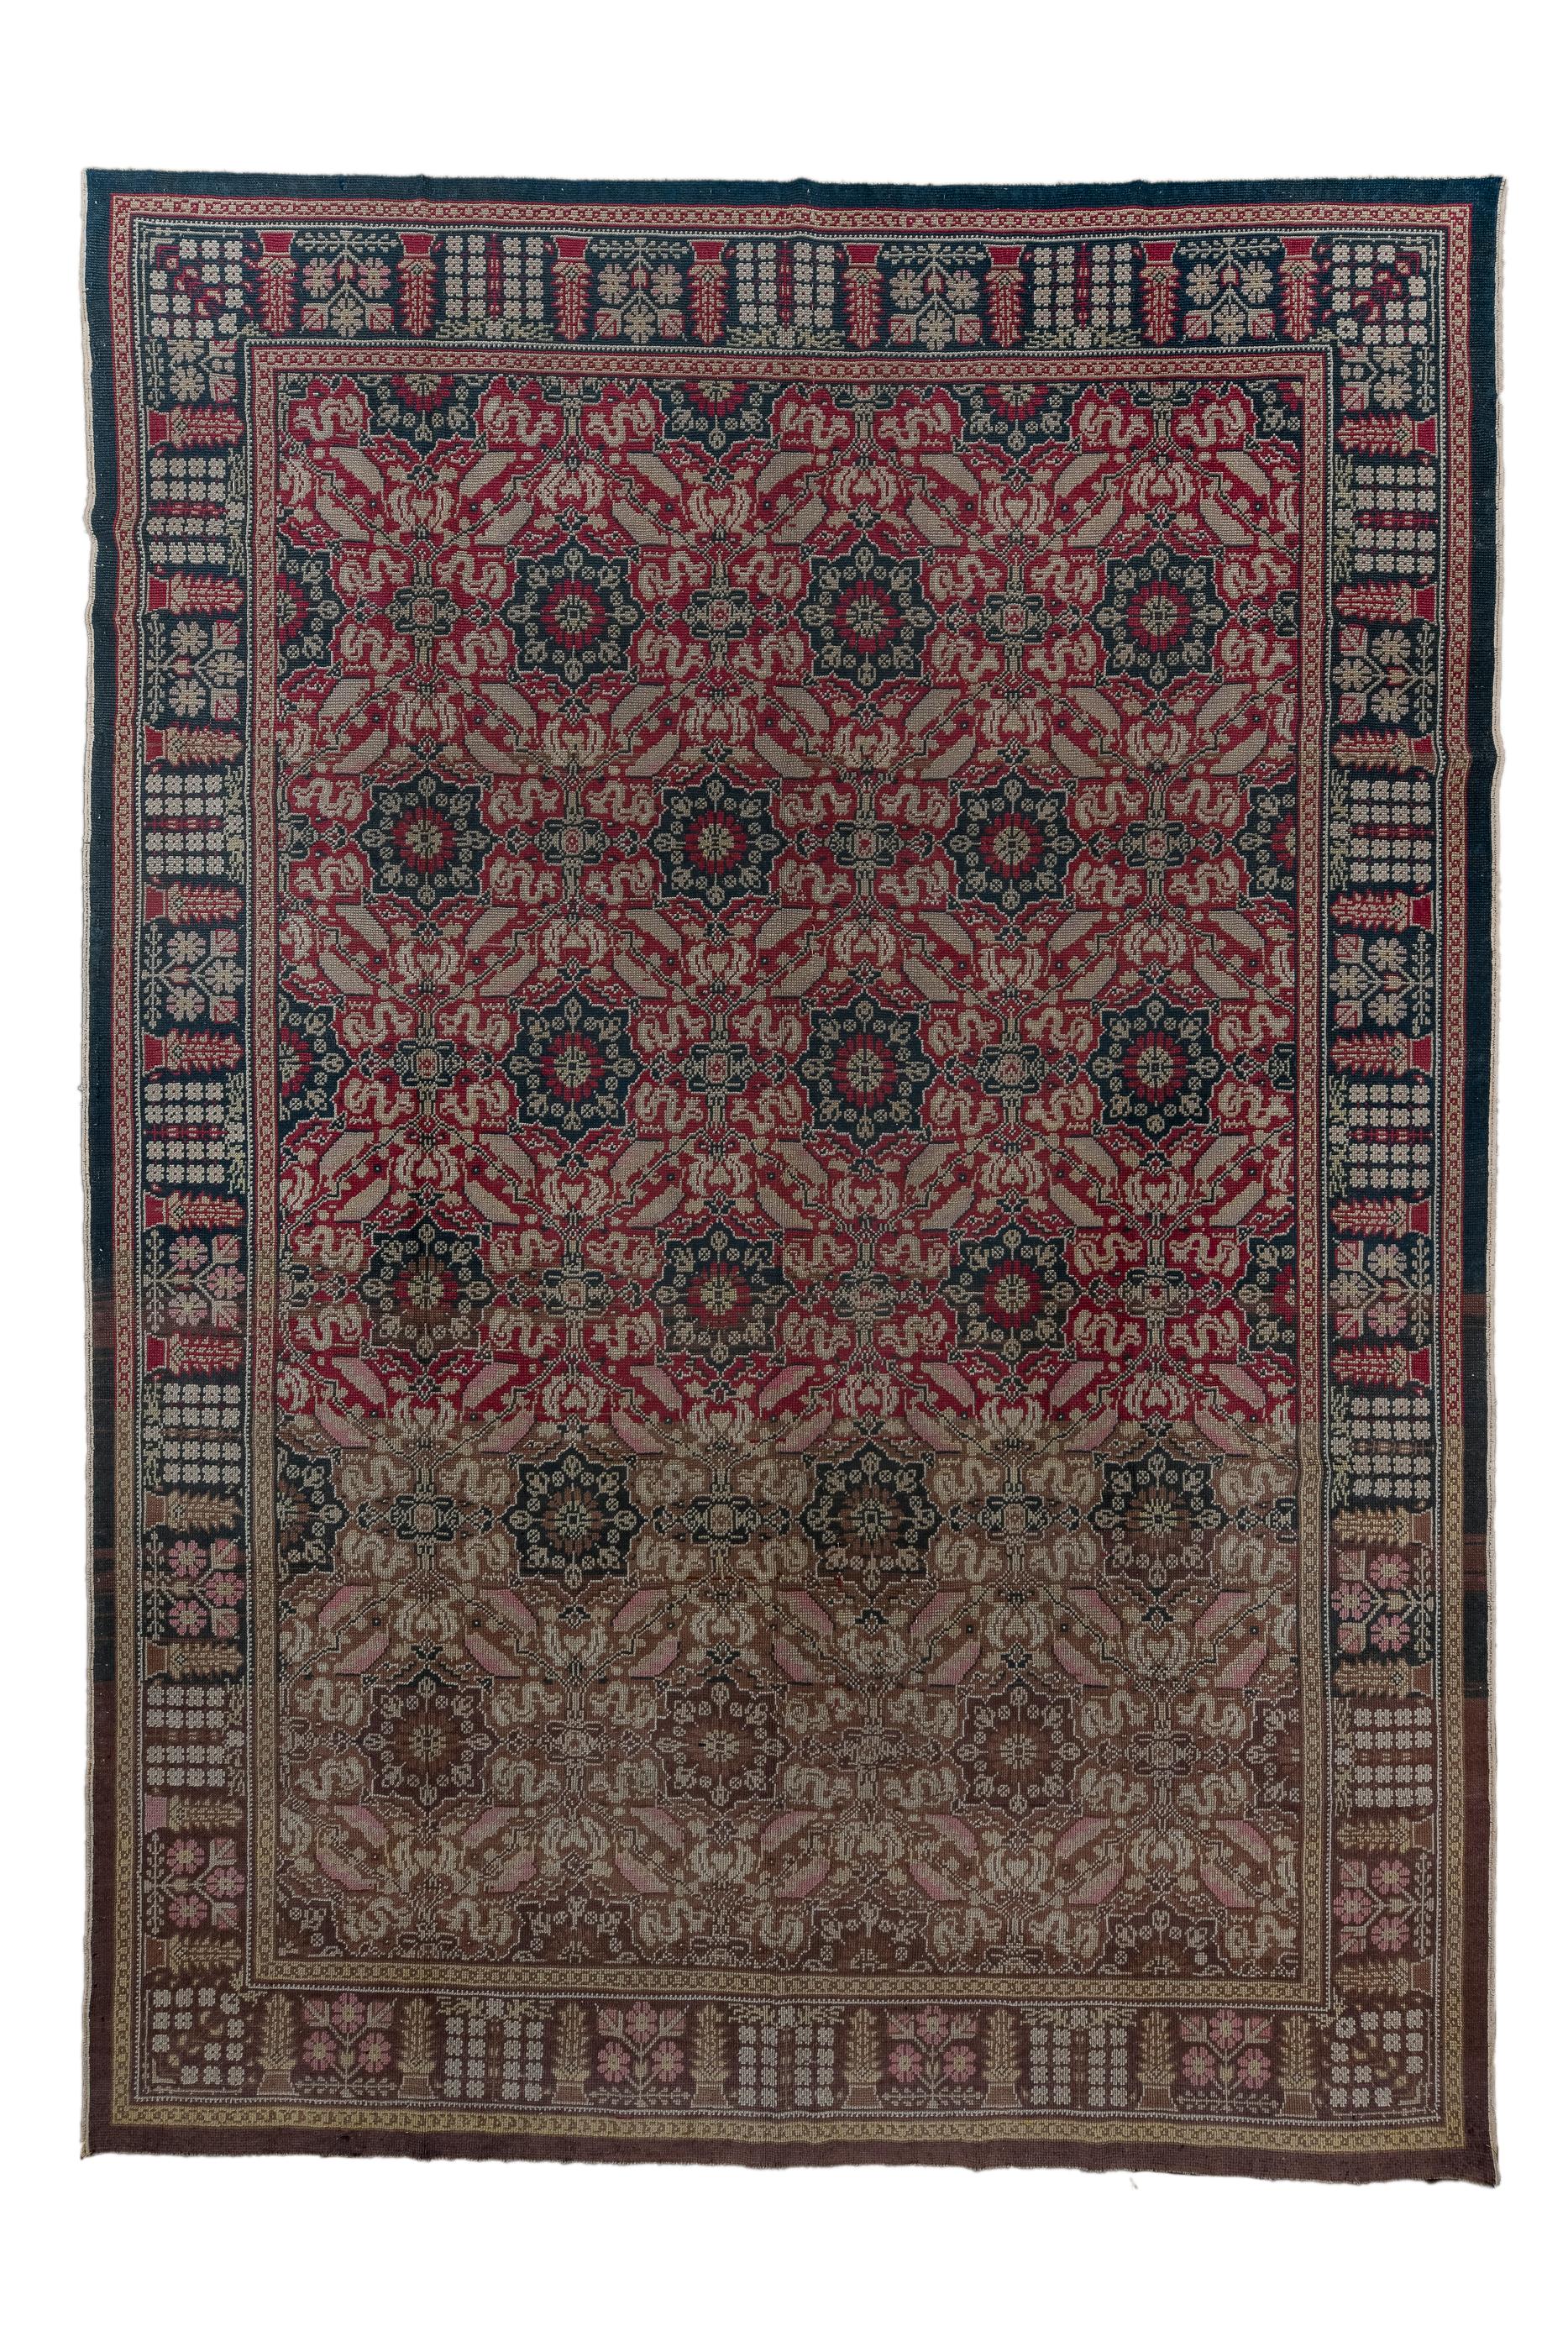 The darker red field shows an allover pattern of closely set small octogrammes,  leaves and wriggling cloudbands, in an Indian Esque pattern. Main dark brown border with square floret assemblages, flowering plants, and vases. Possibly English and